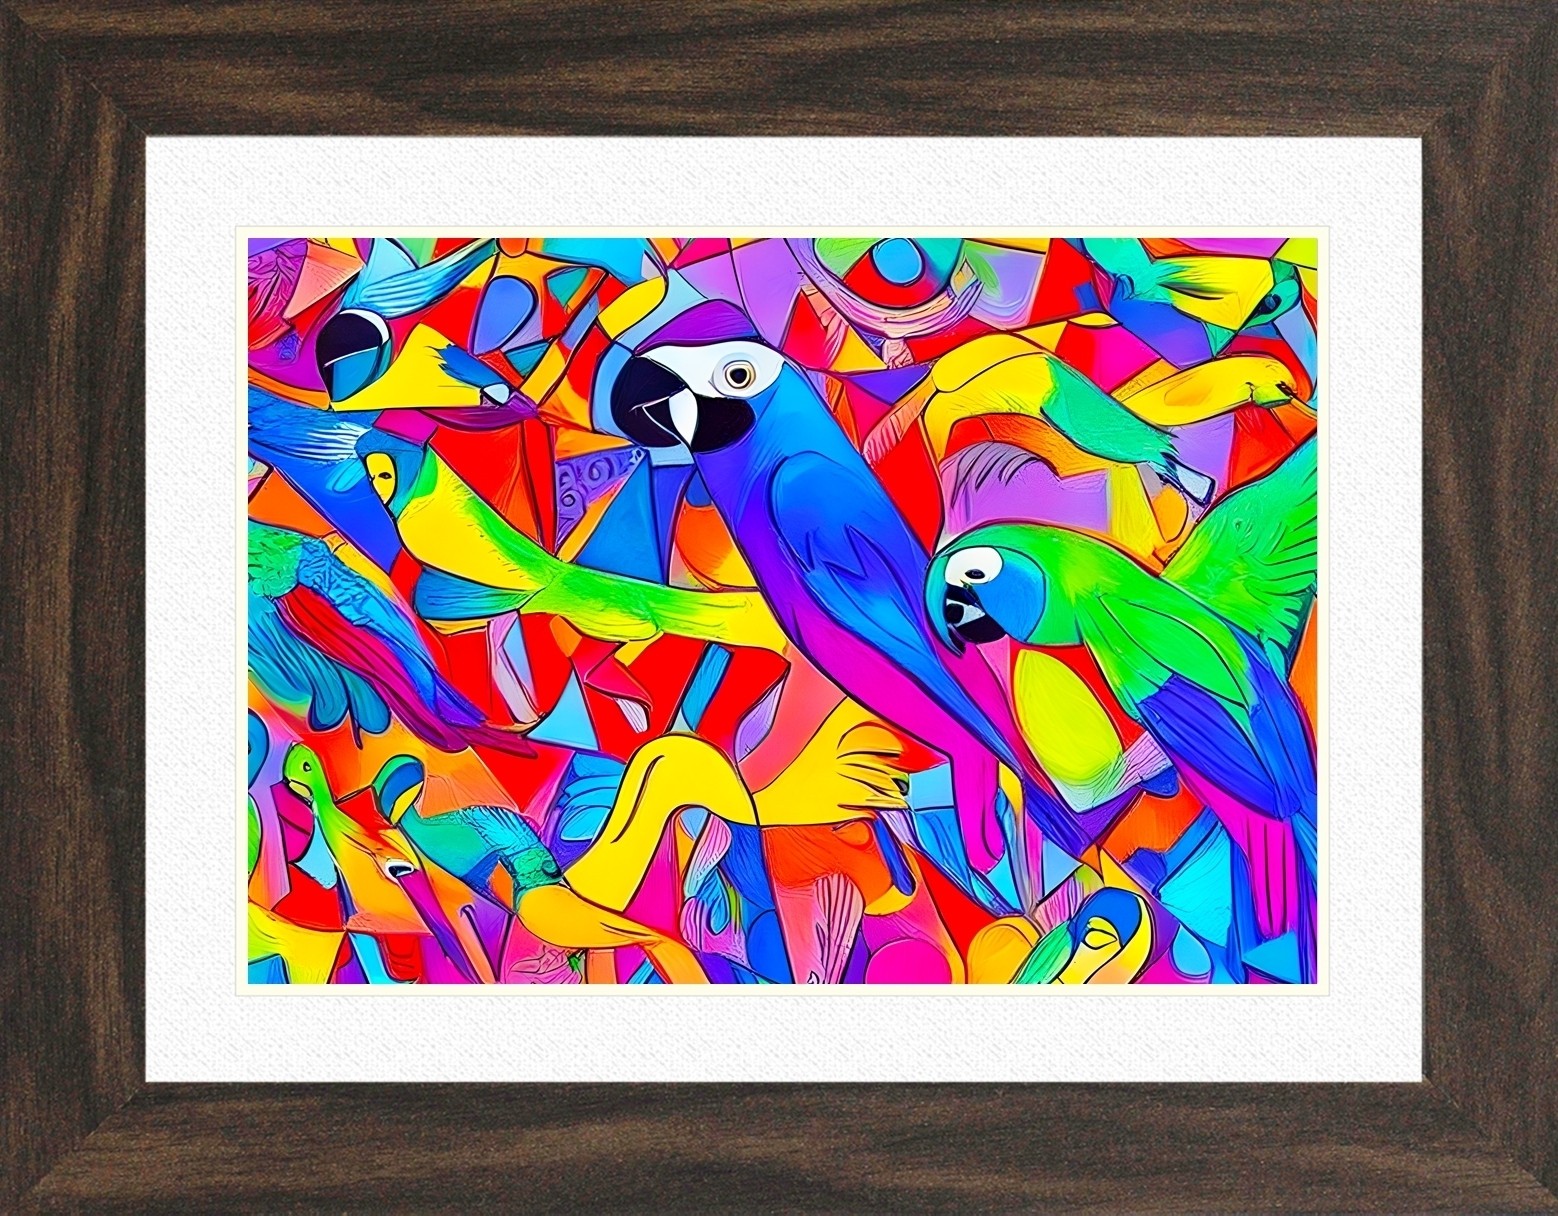 Parrot Animal Picture Framed Colourful Abstract Art (30cm x 25cm Walnut Frame)